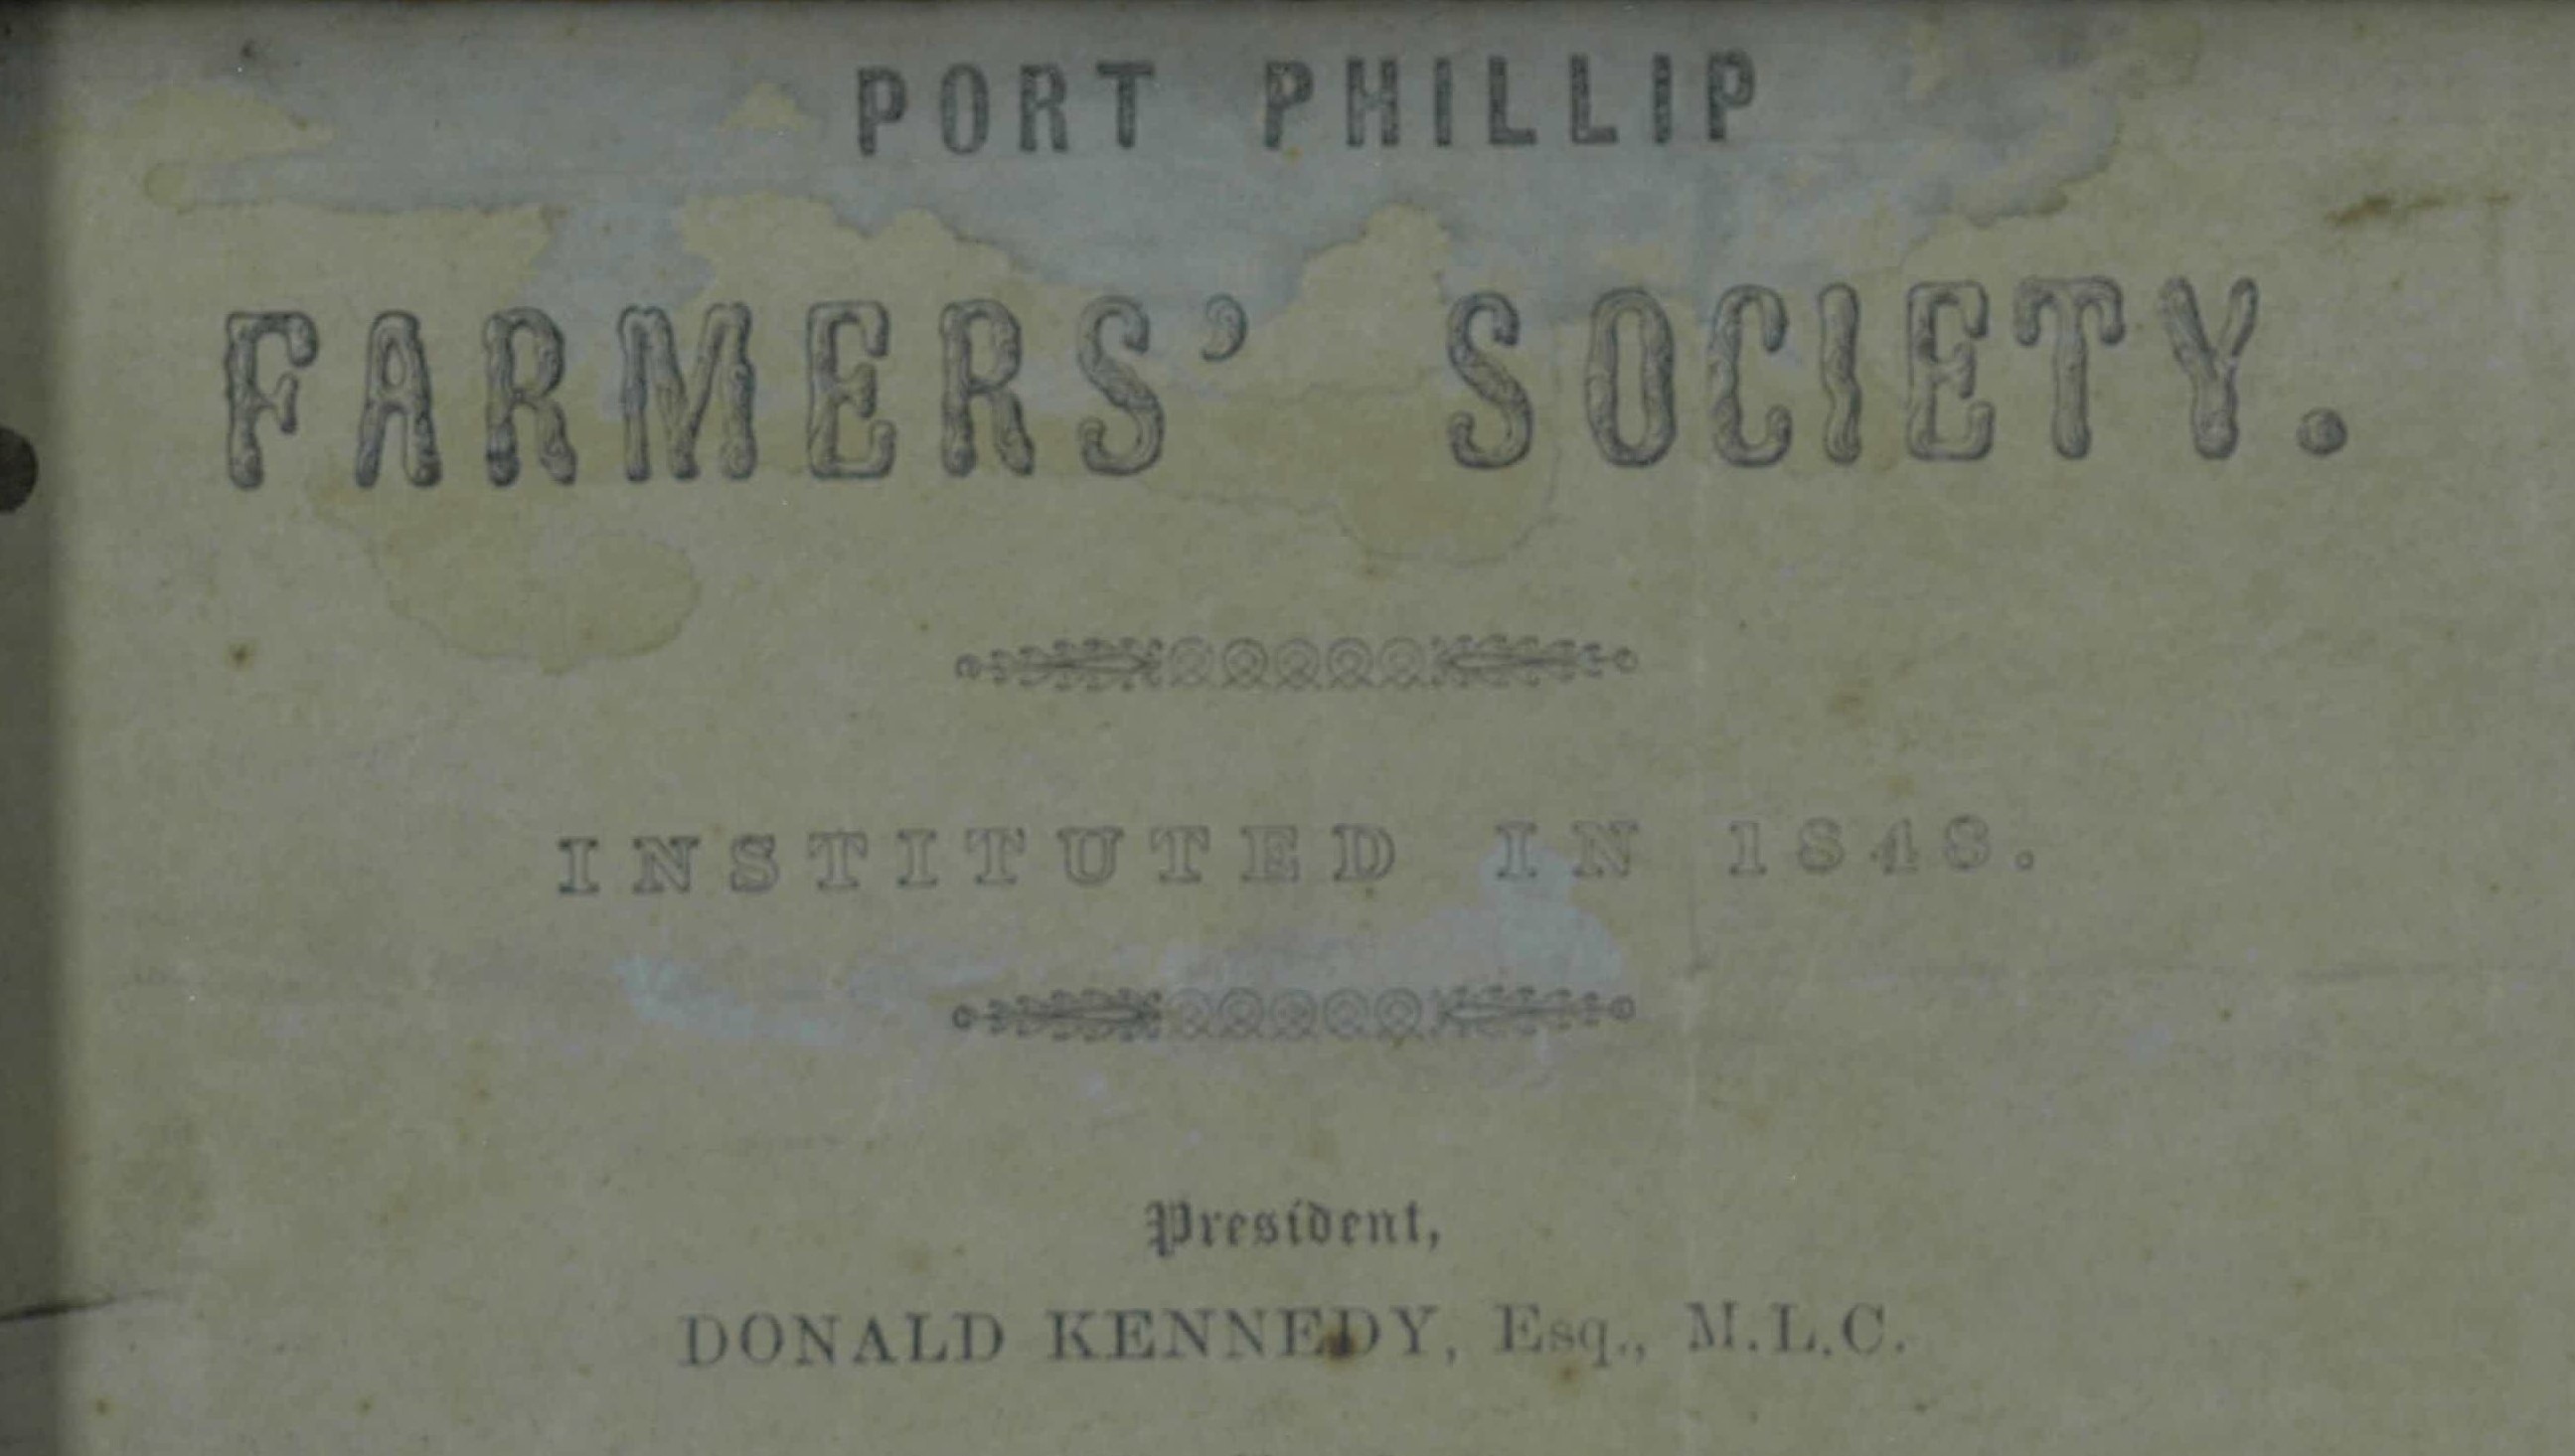 Source: A closer look at the rules published by the Port Phillip Farmers’ Society in 1848, including Hon. Donald Kennedy's name on the front. Melbourne Royal Heritage Collection.